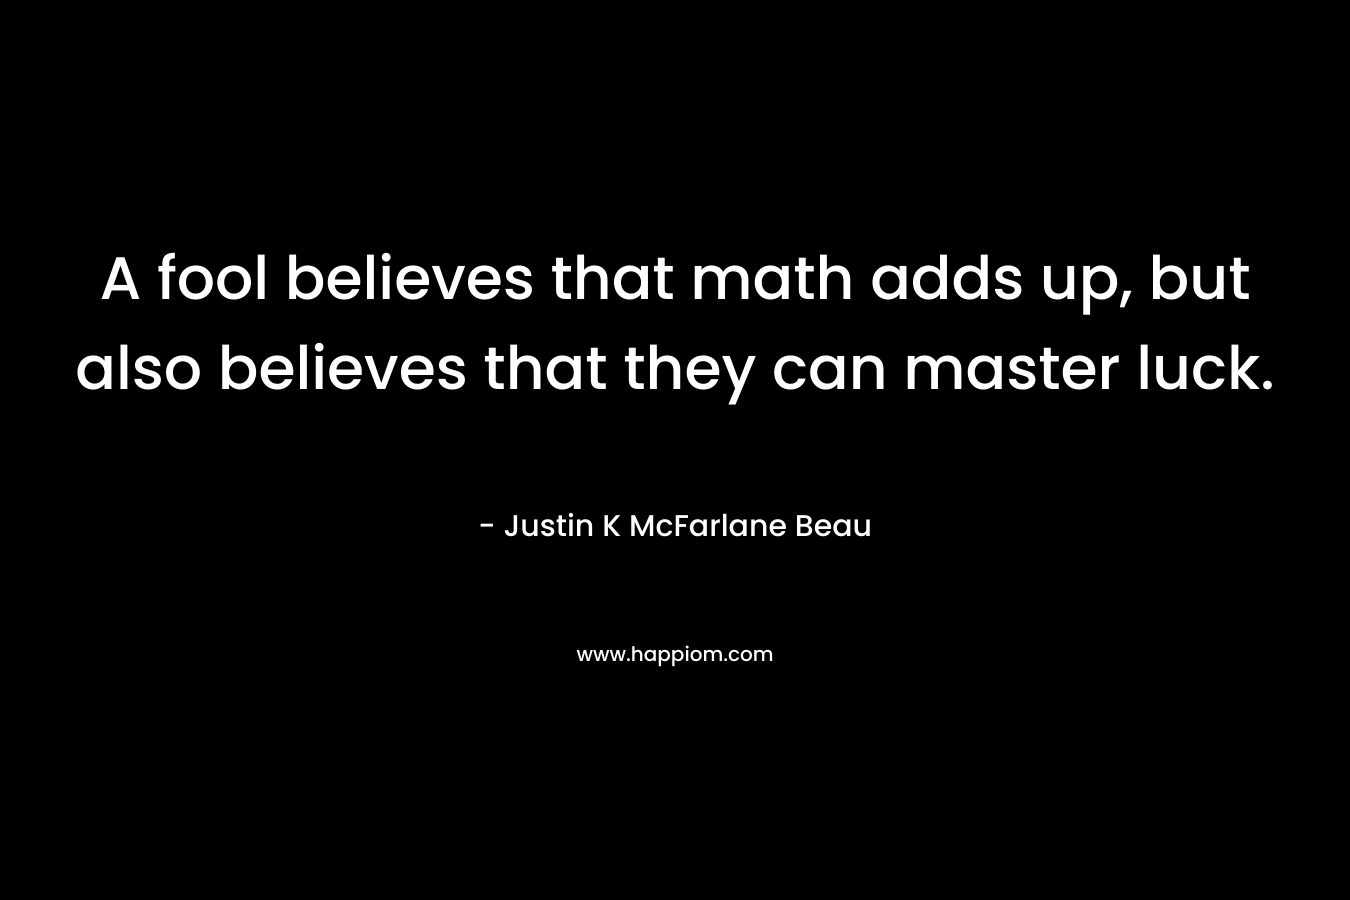 A fool believes that math adds up, but also believes that they can master luck. – Justin K McFarlane Beau